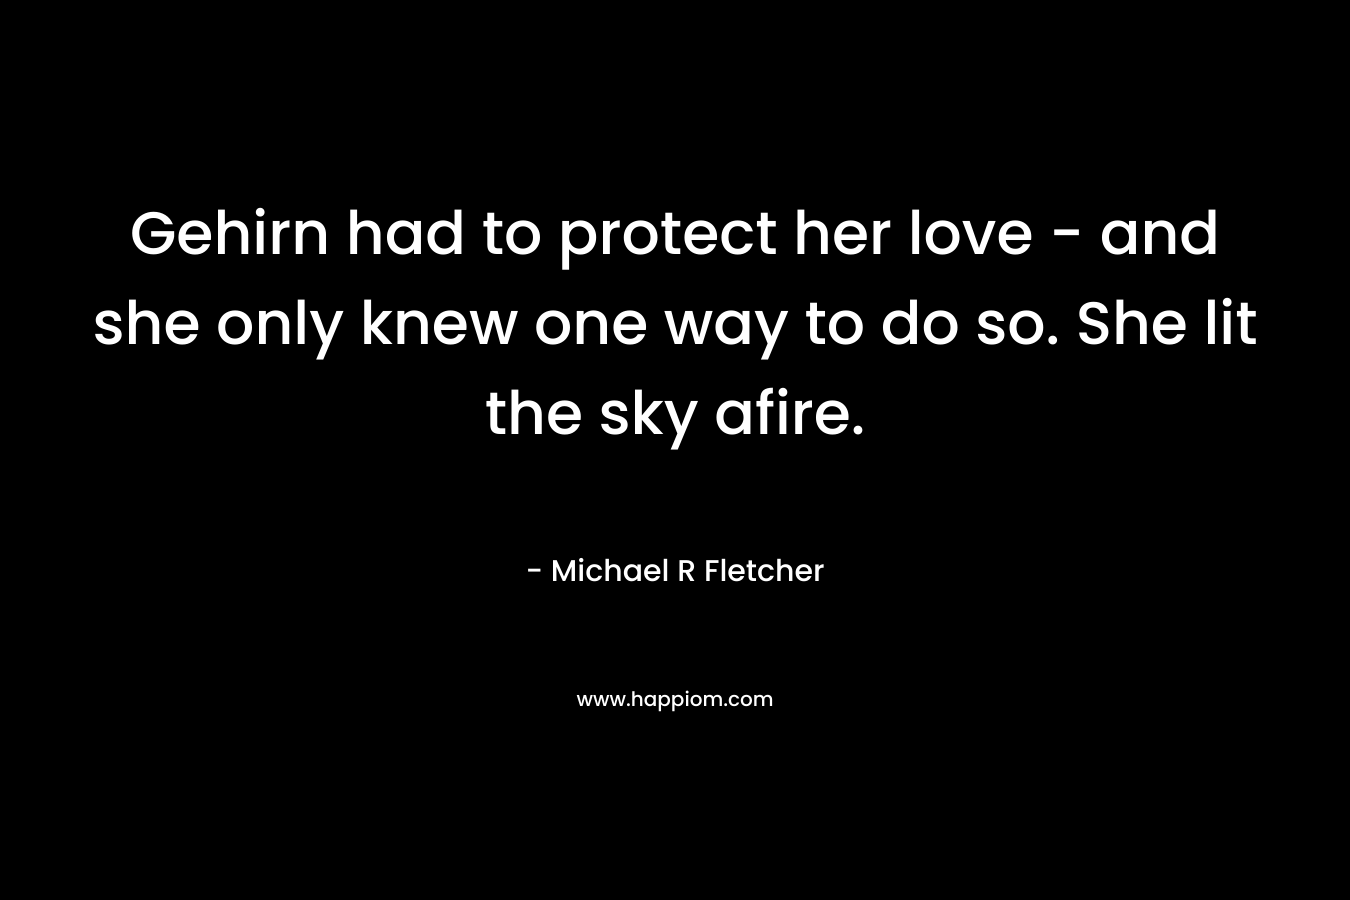 Gehirn had to protect her love – and she only knew one way to do so. She lit the sky afire. – Michael R Fletcher